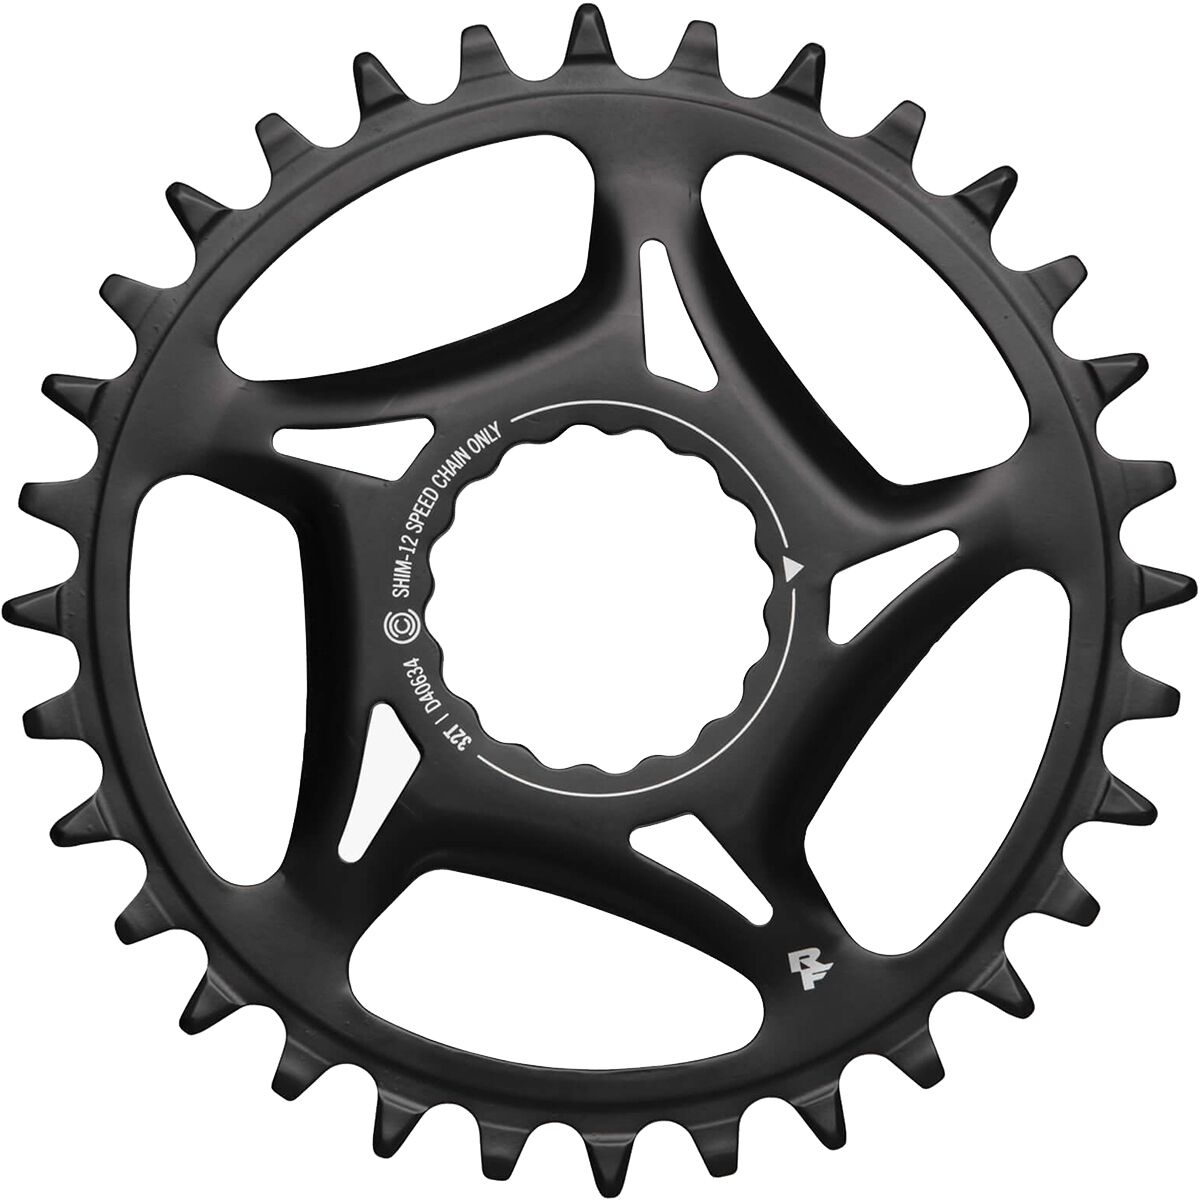 Race Face Cinch Shimano Steel Chainring Black, 30t, 12-Speed